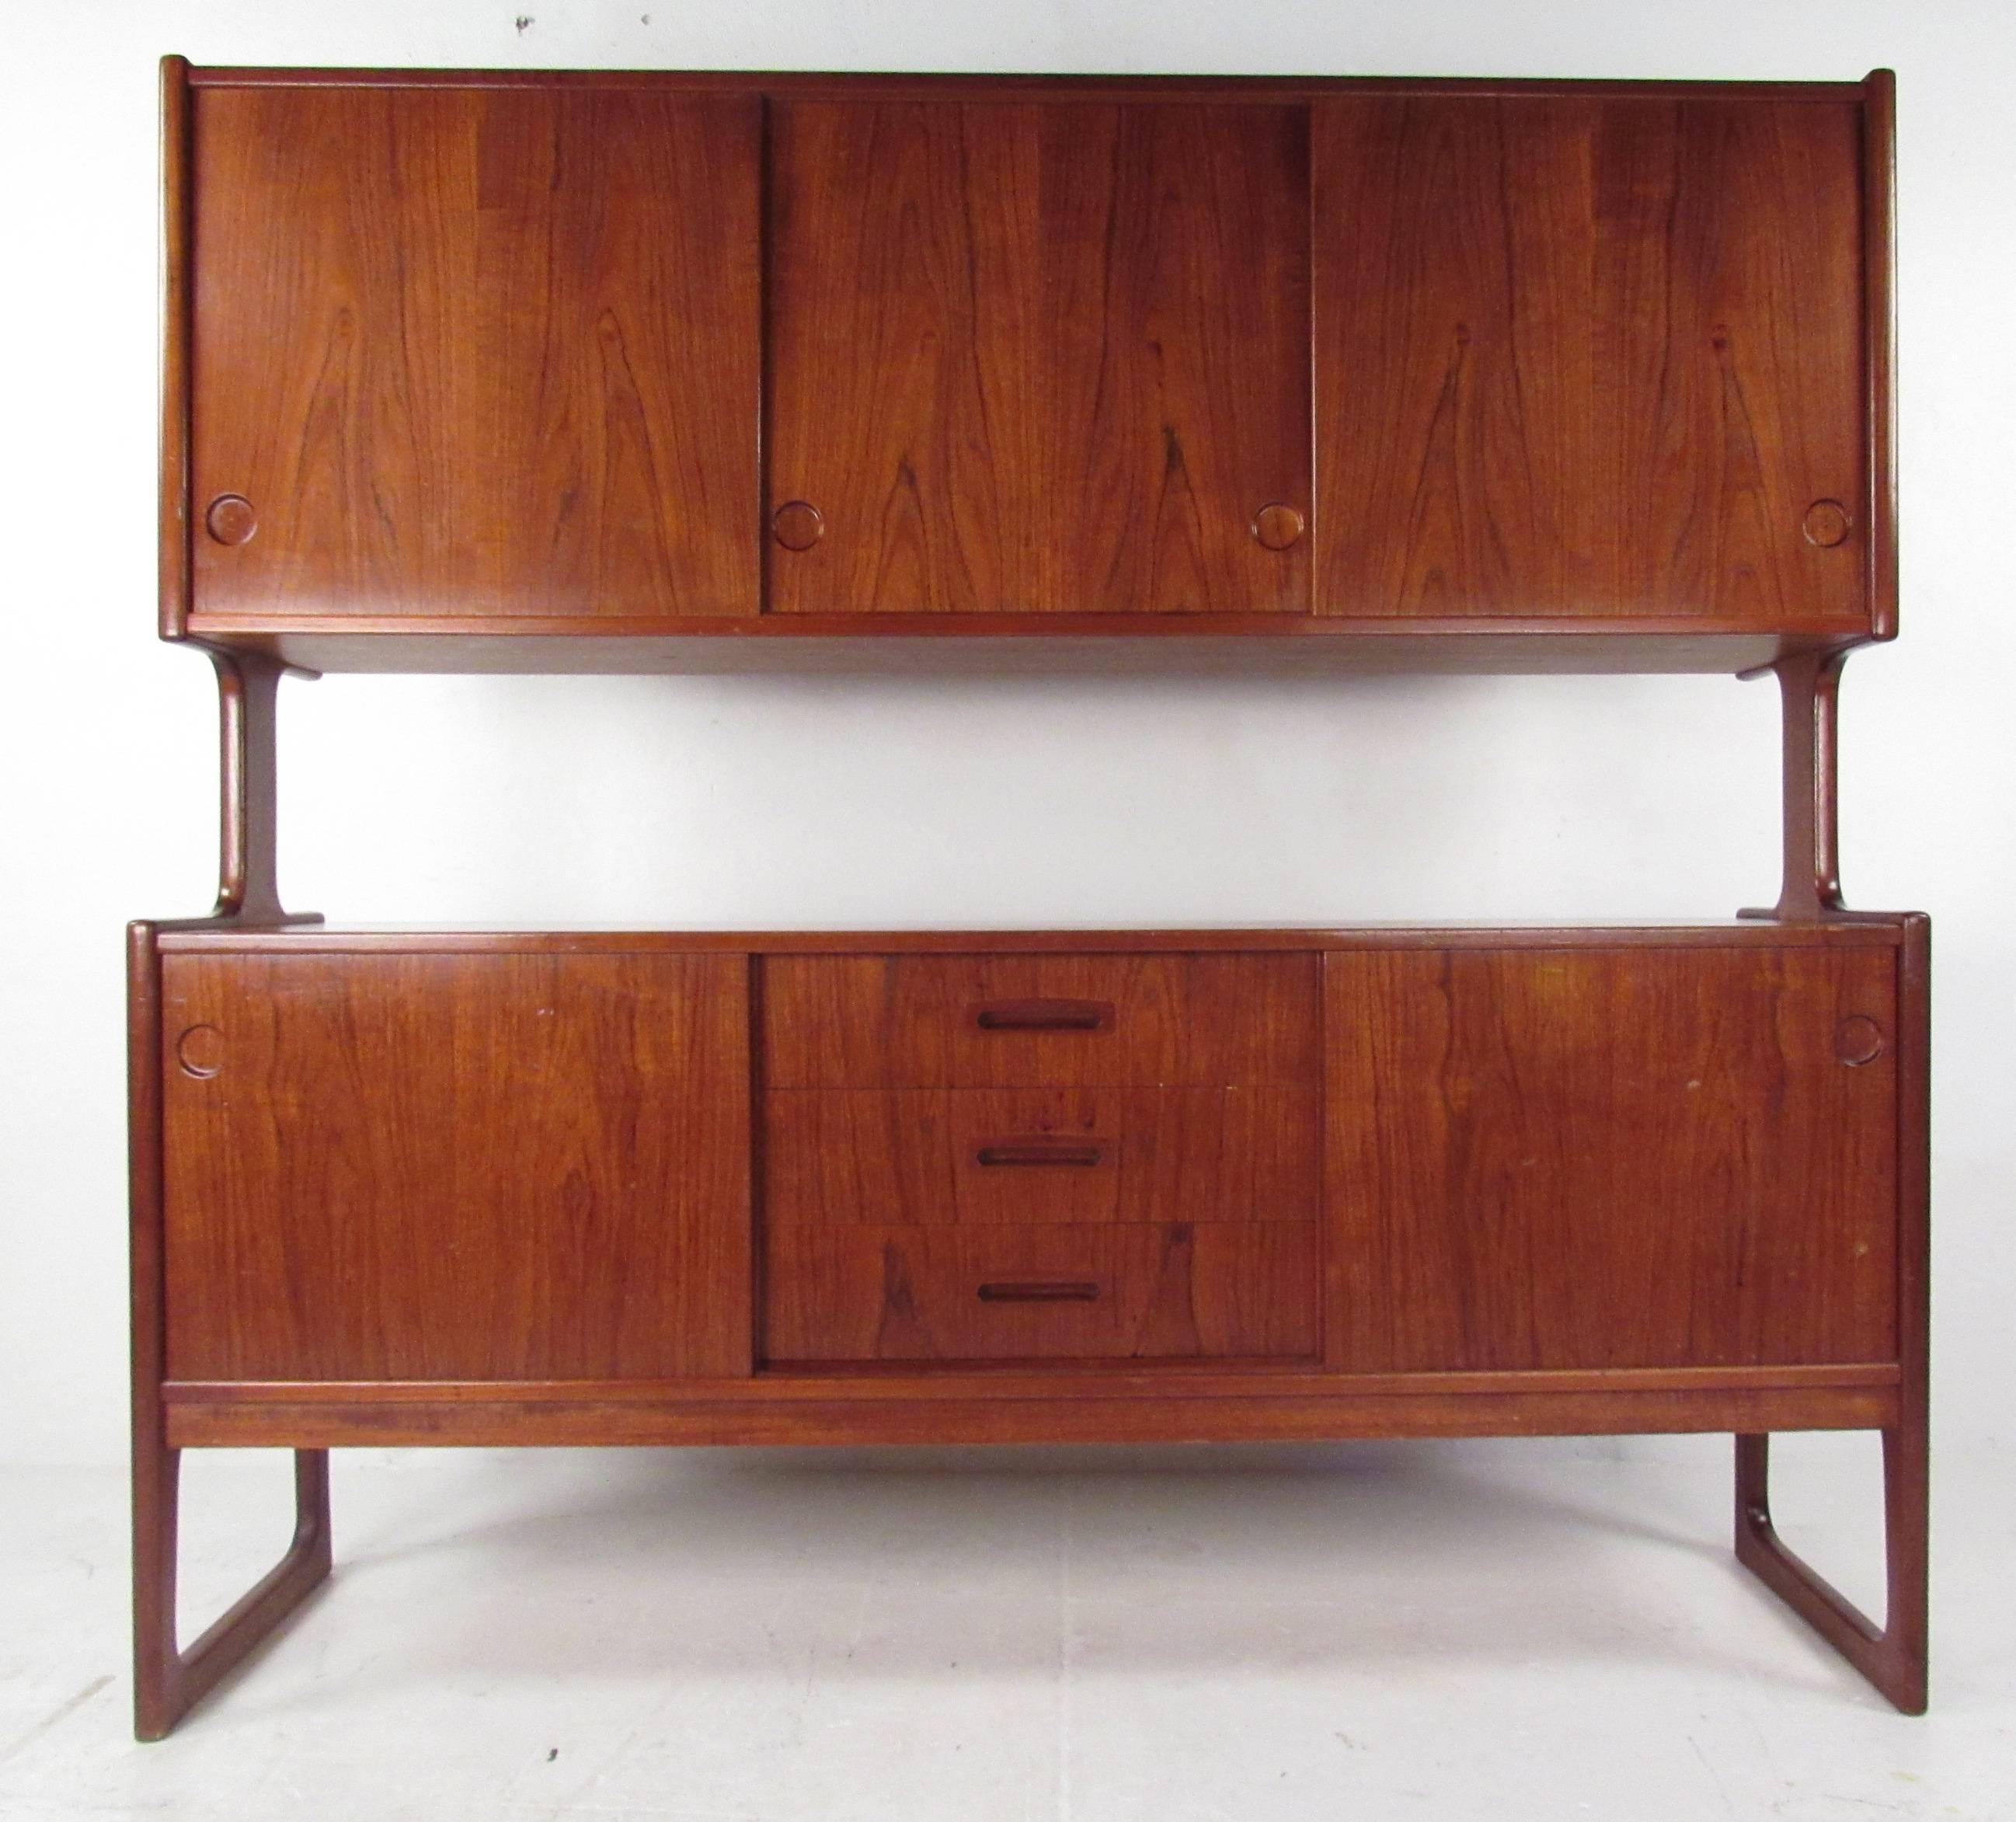 Beautifully constructed bi-level sideboard with sled legs, multiple storage drawers/compartments, adjustable shelves and finished back. Impressive statement piece with stunning teak finish and quality mid-century modern construction. Handsome and